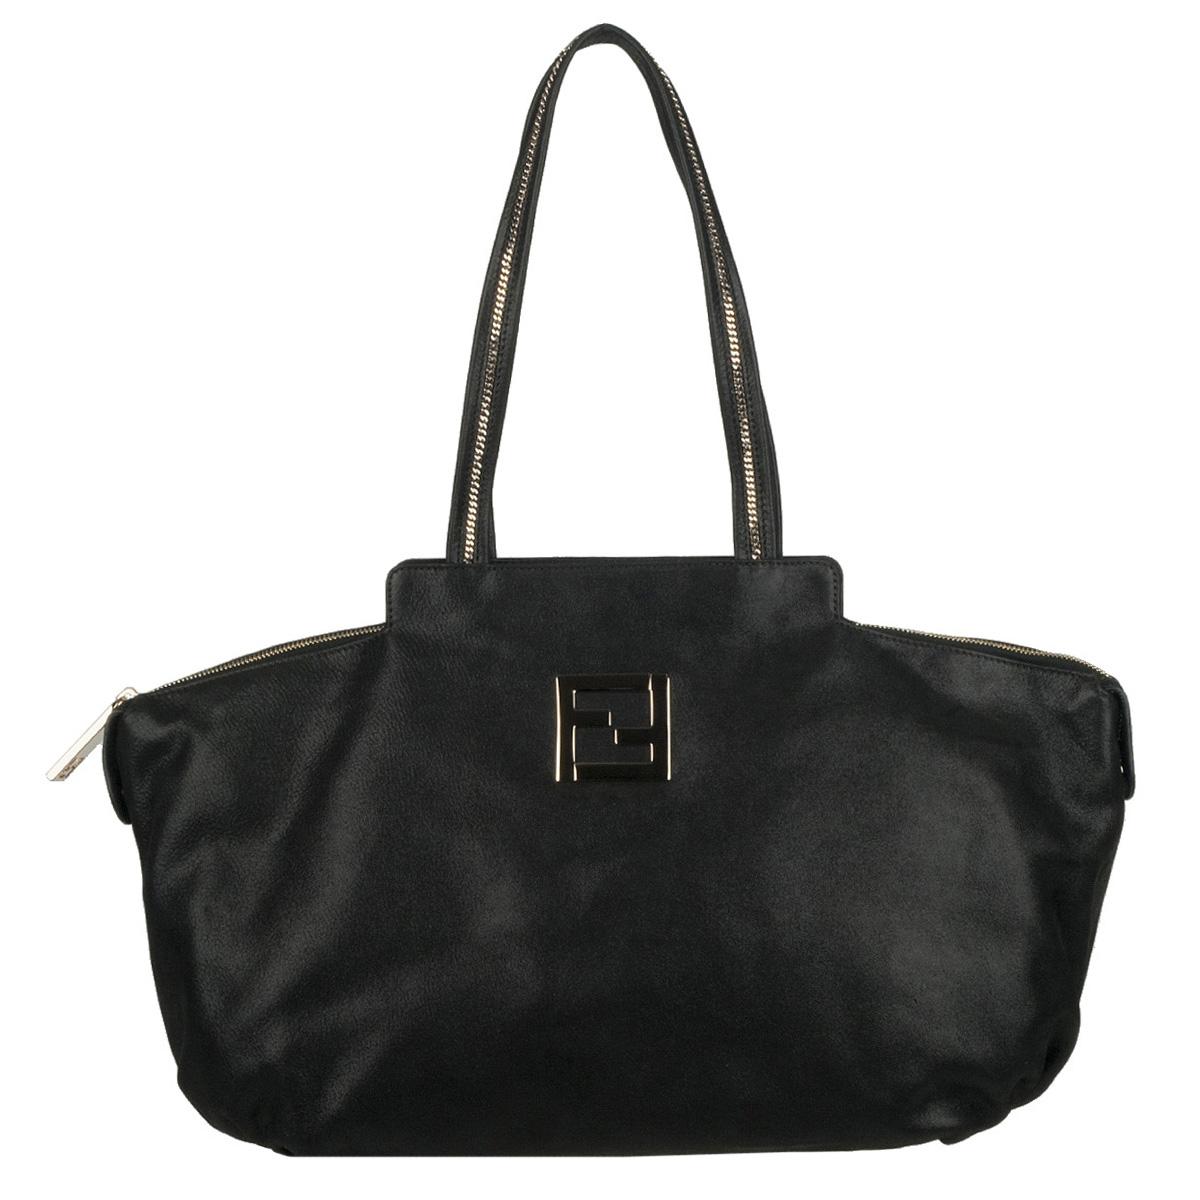 Fendi Chains Black Suede Leather Tote Bag